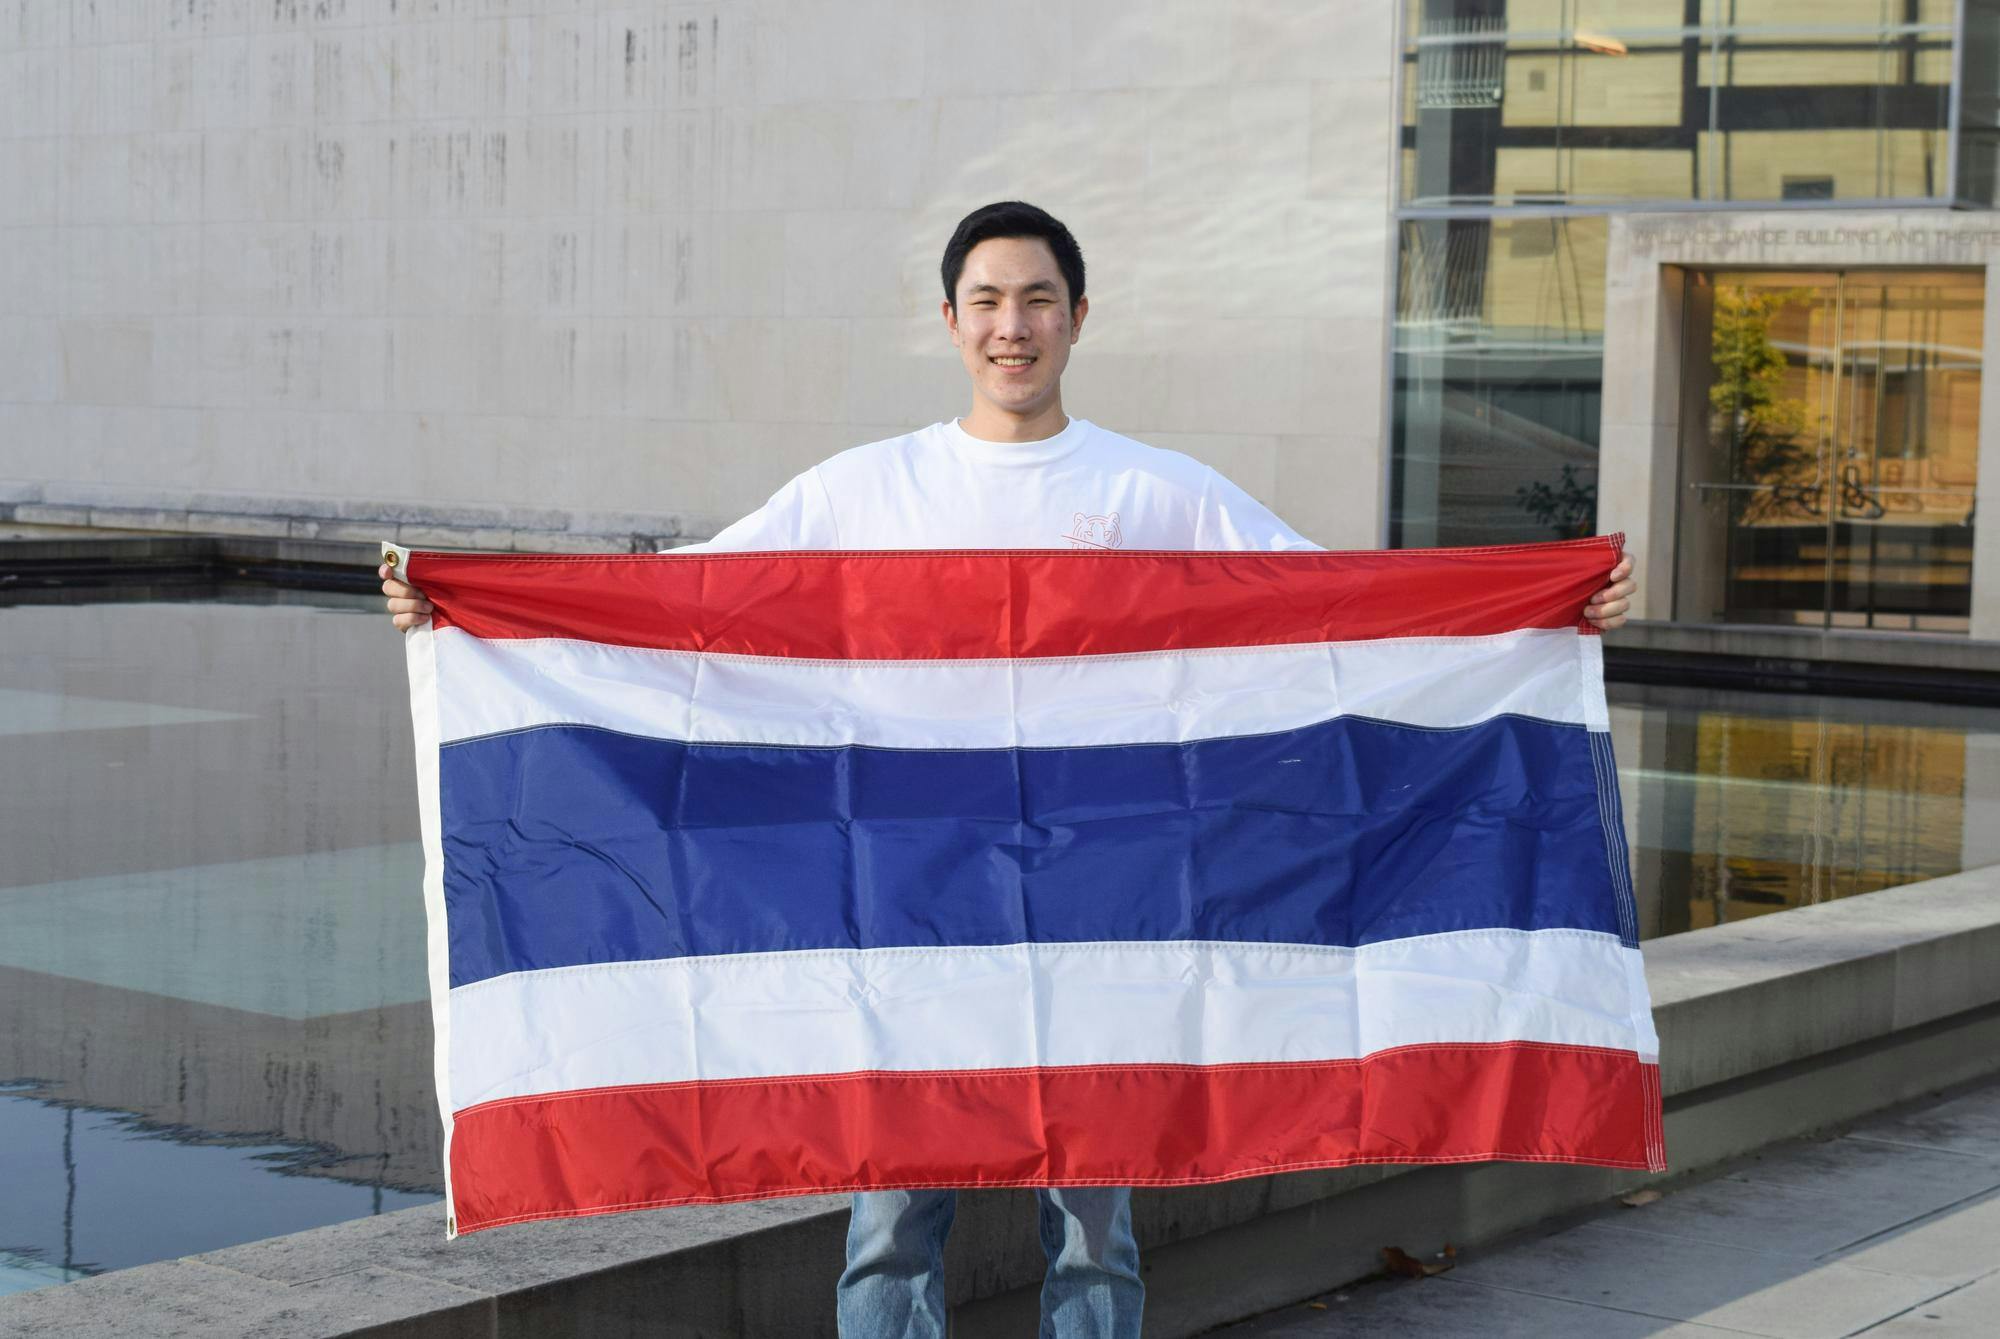 Student stands in the center, holding the flag of Thailand.